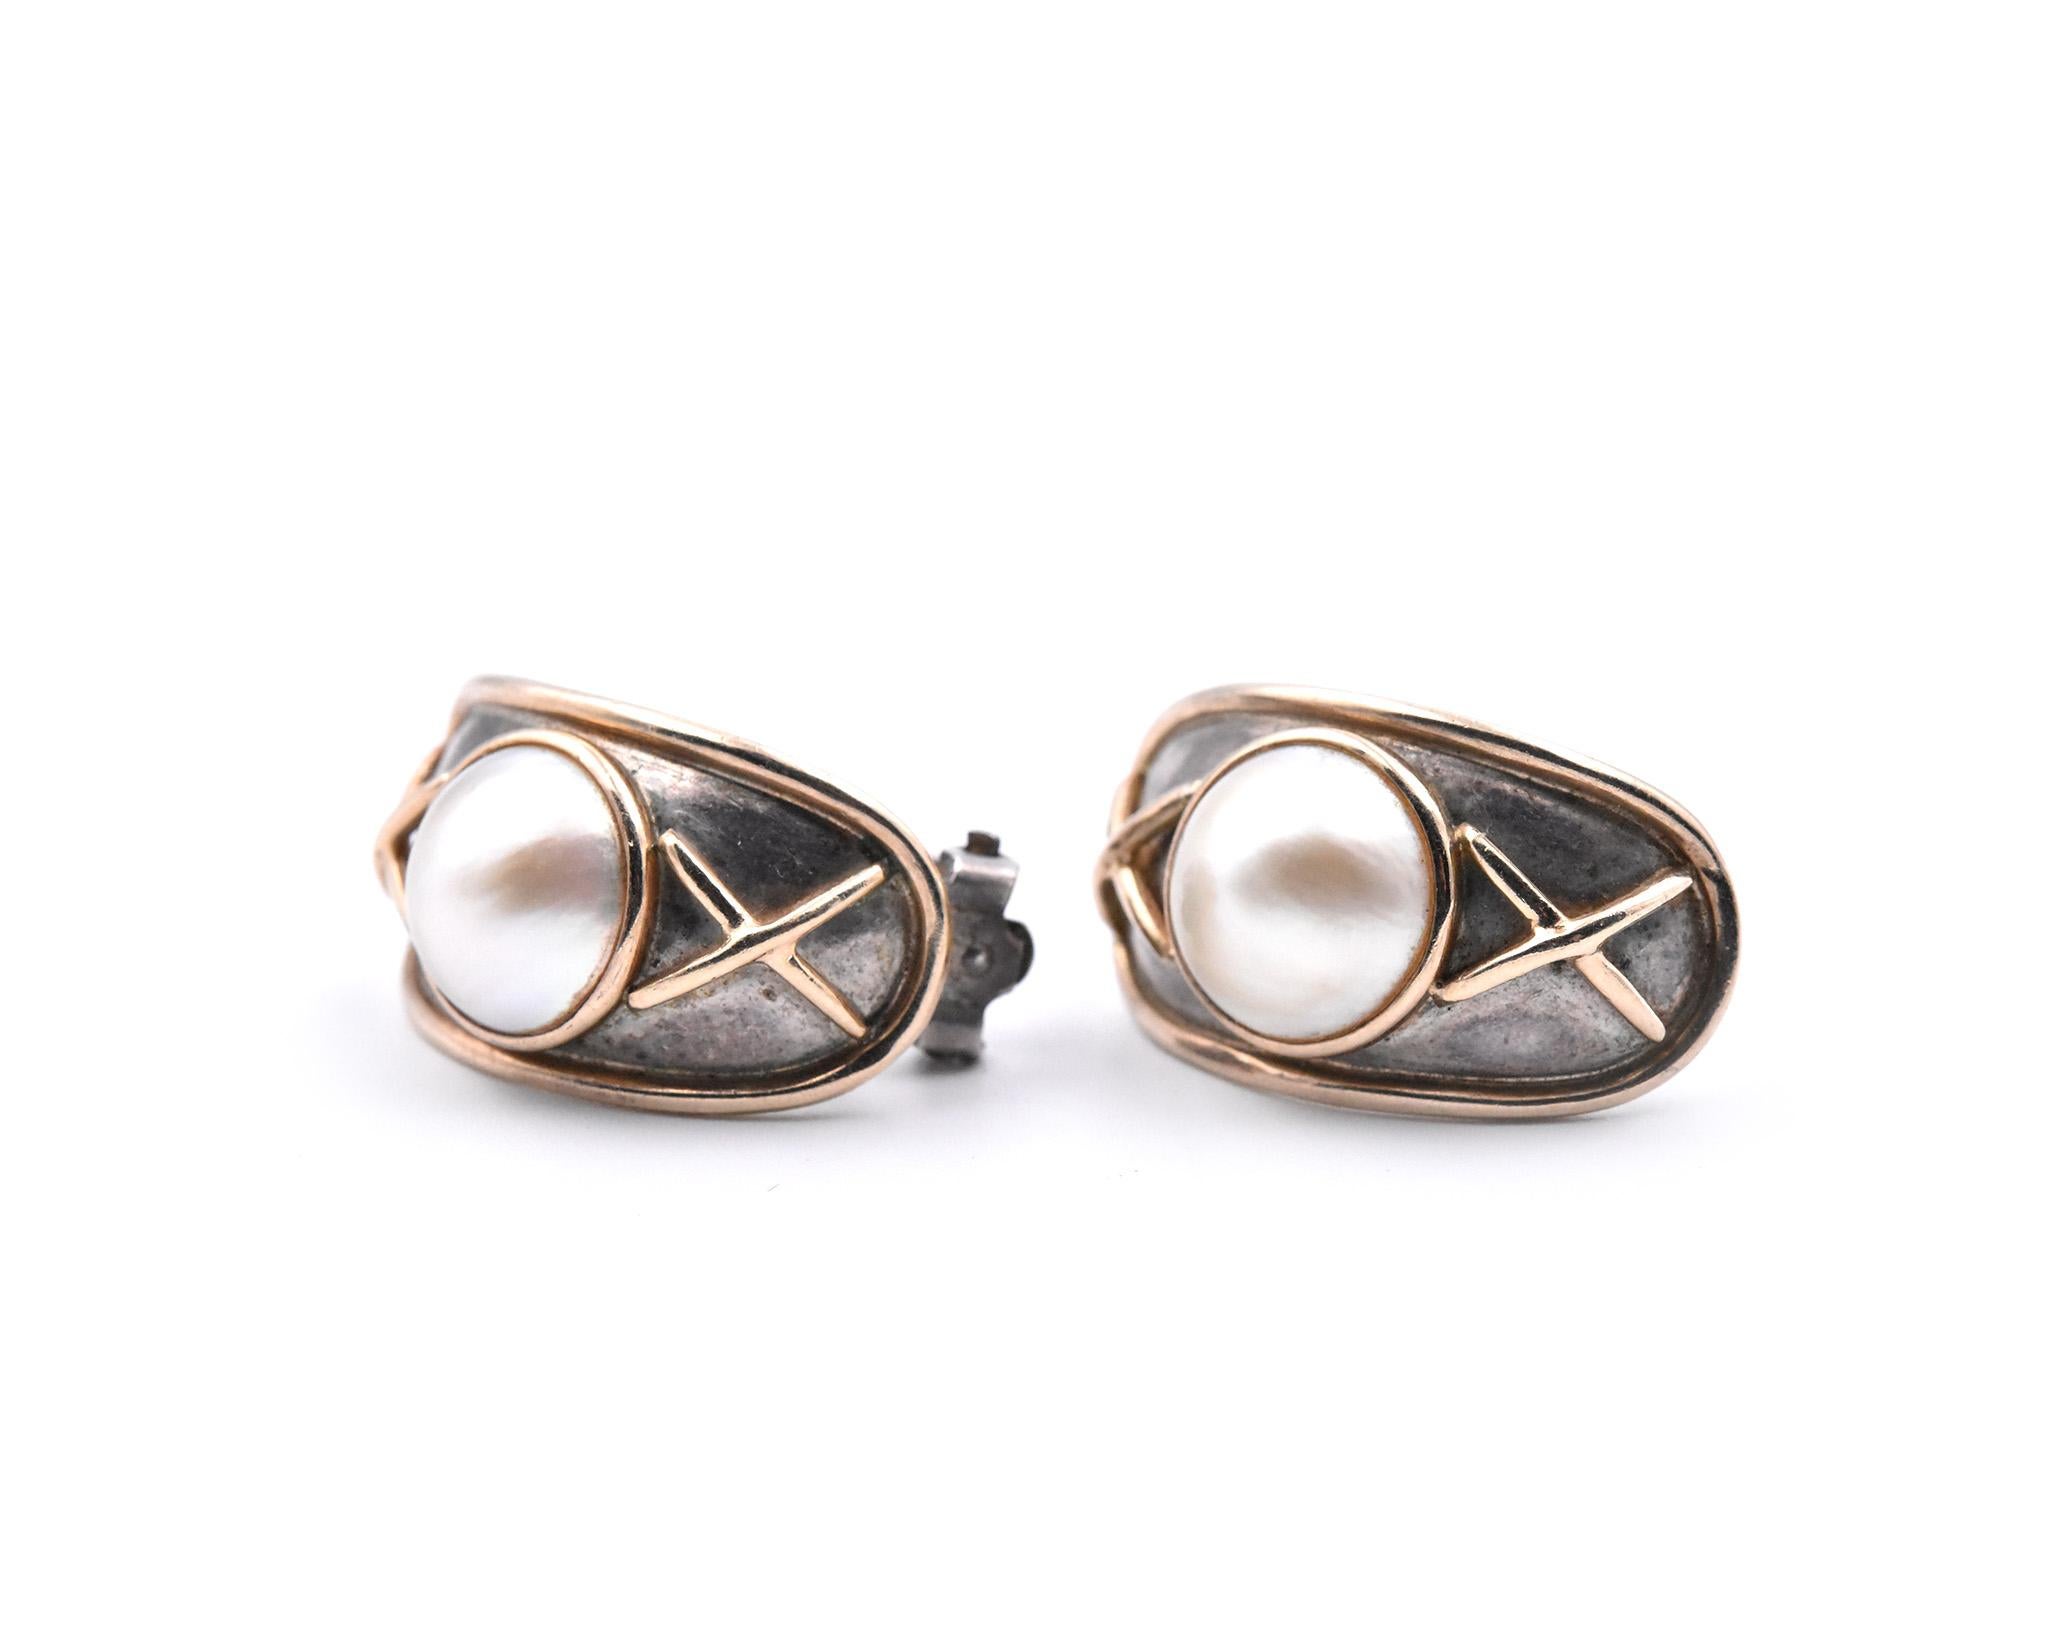 Designer: custom design
Material: sterling silver and 14k yellow gold
Pearls: mabe pearls
Fastening: clip on with post
Dimensions: Earrings measure 15.95mm x 29mm
Weight: 13.10 grams
